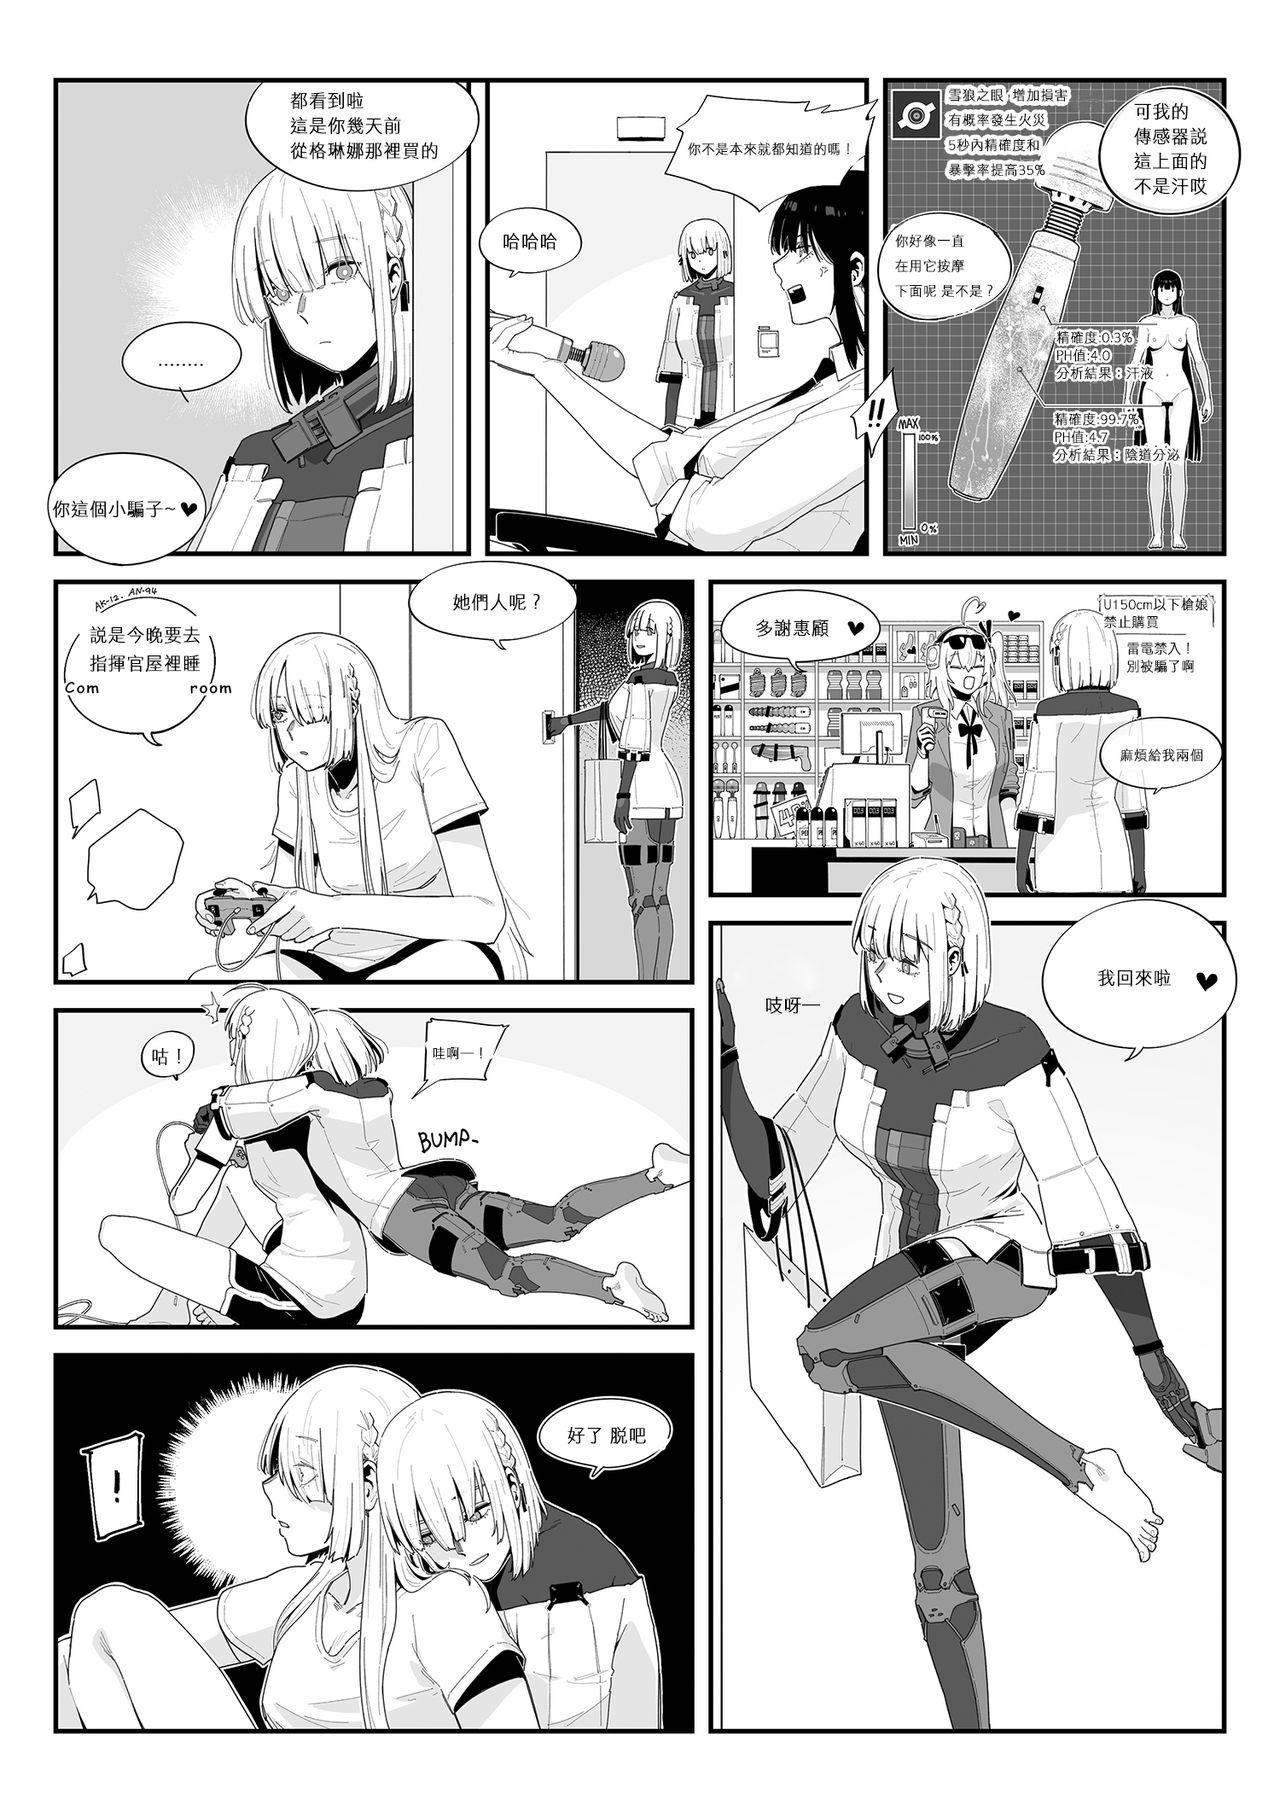 Squirters Crazy dog 2 - Girls frontline Gemidos - Page 3